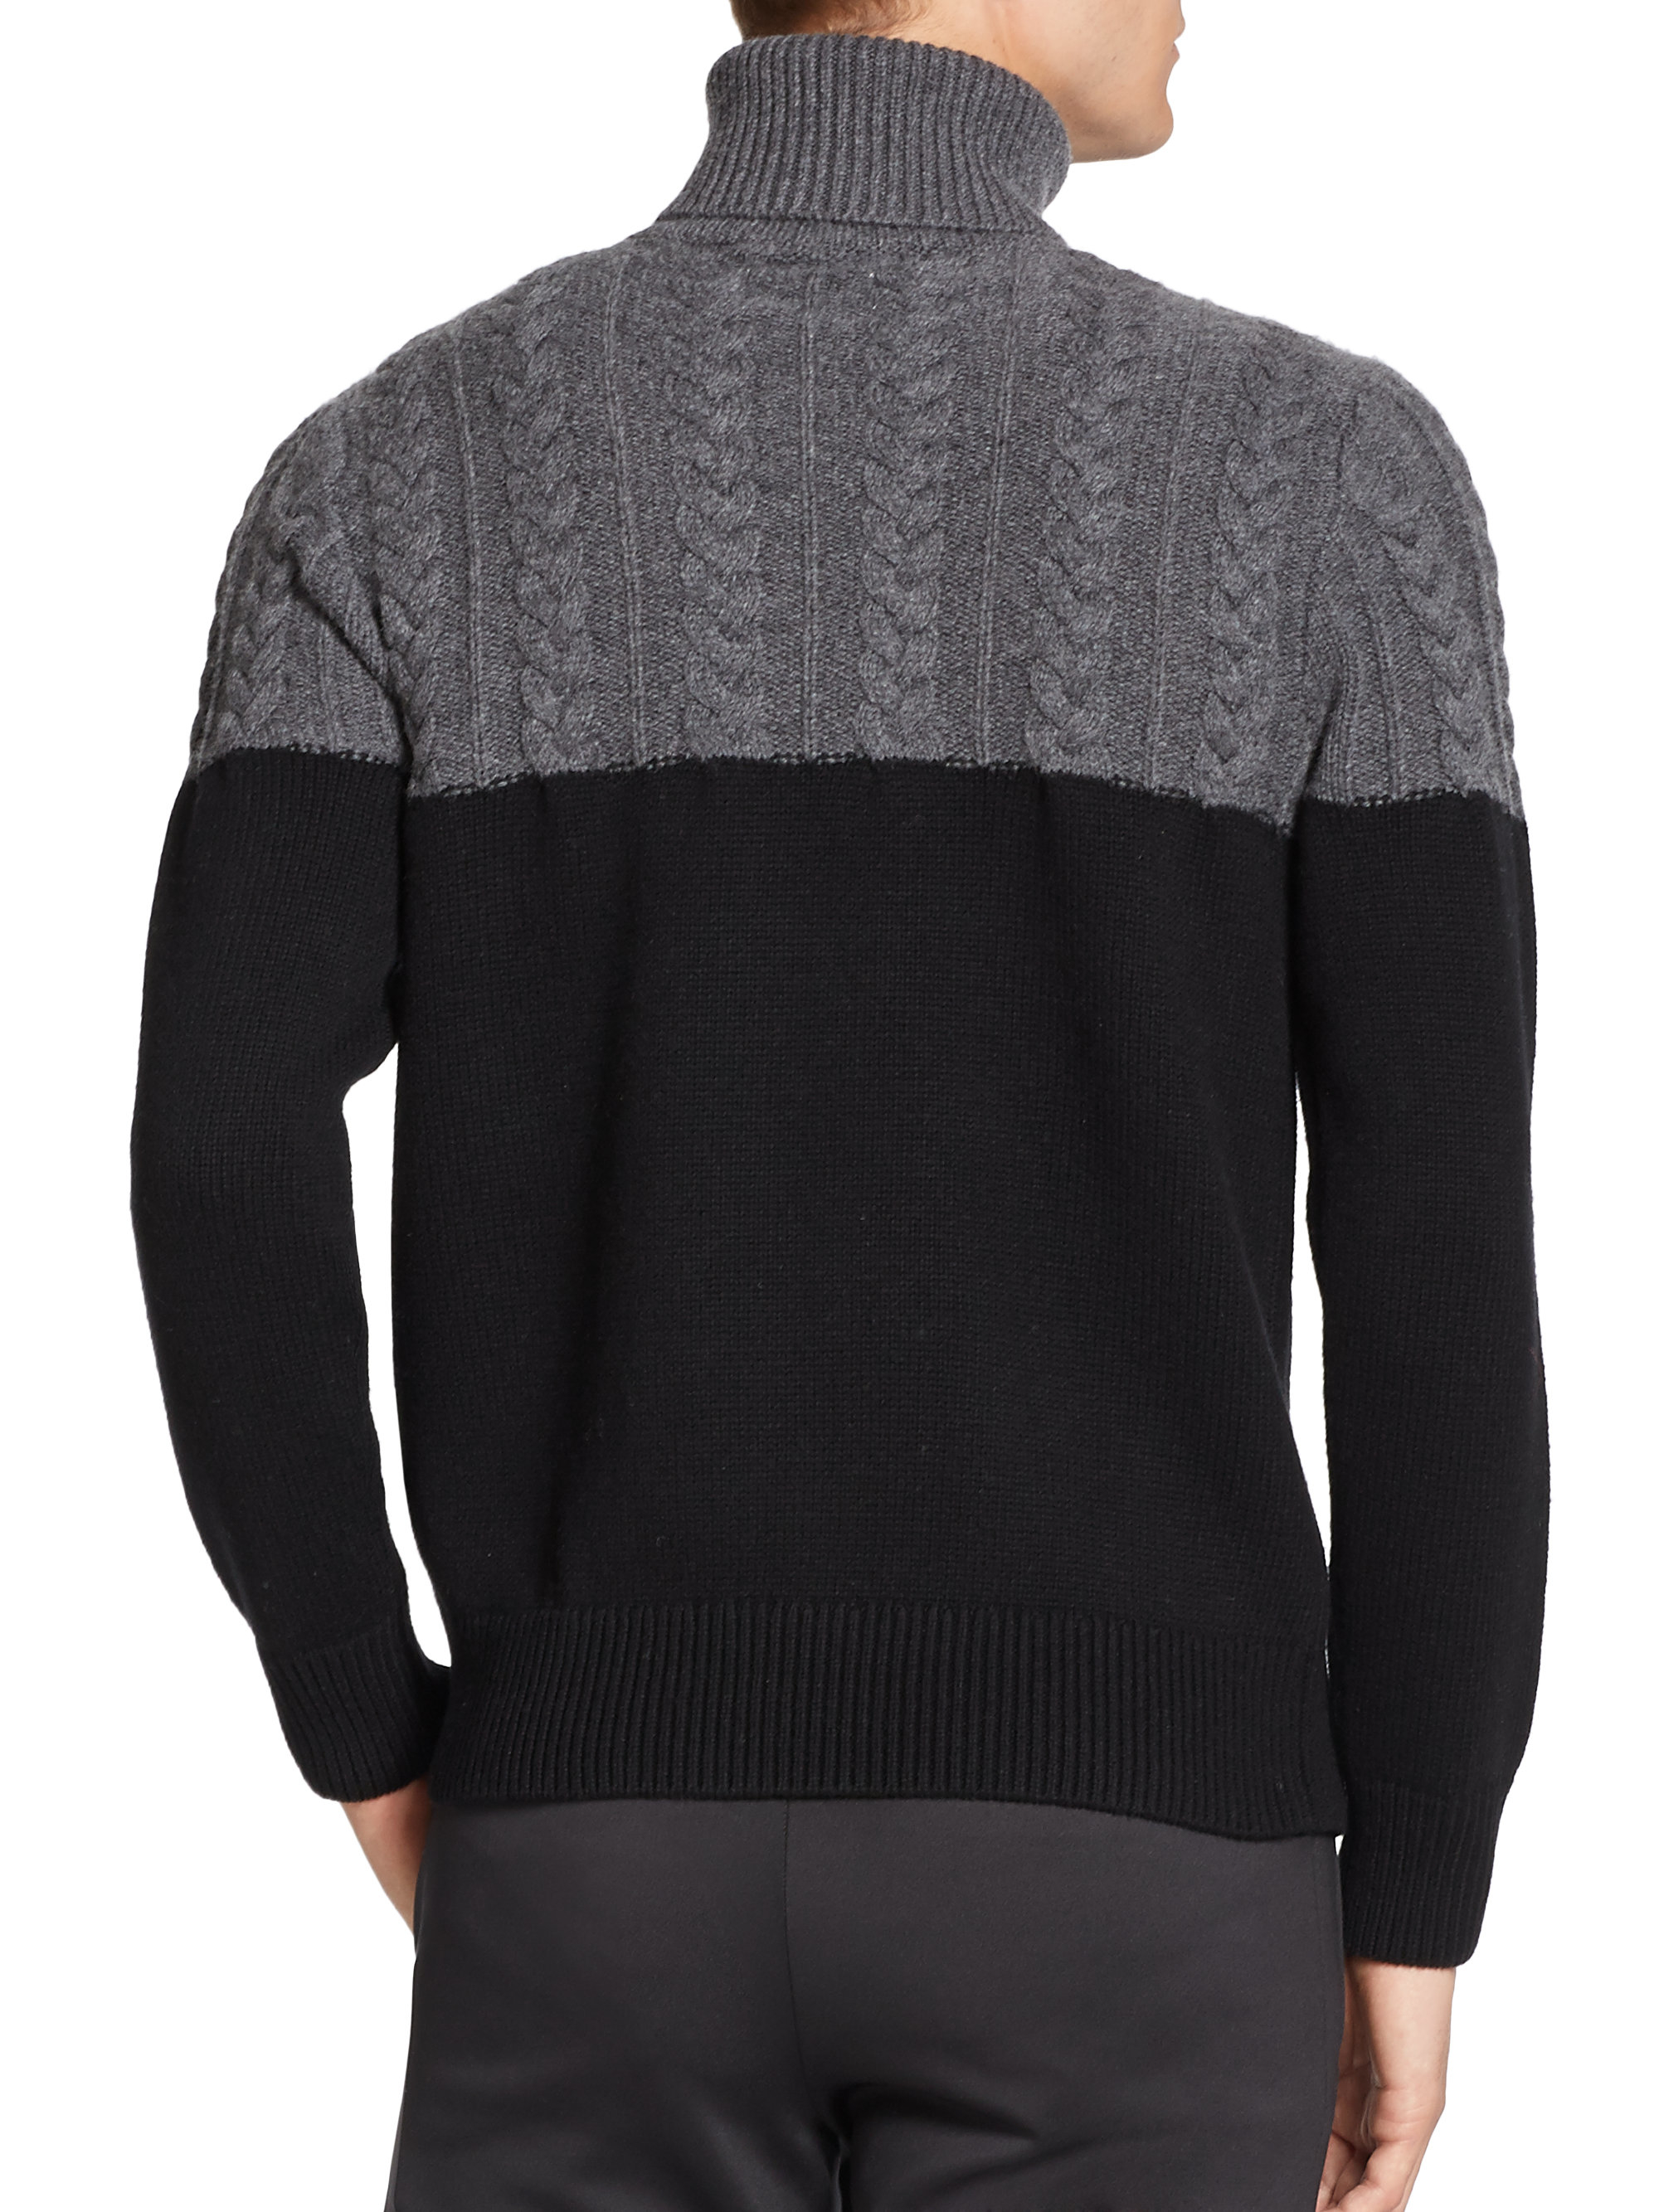 Ovadia and sons Half Cable Knit Turtleneck Sweater in Black for Men | Lyst